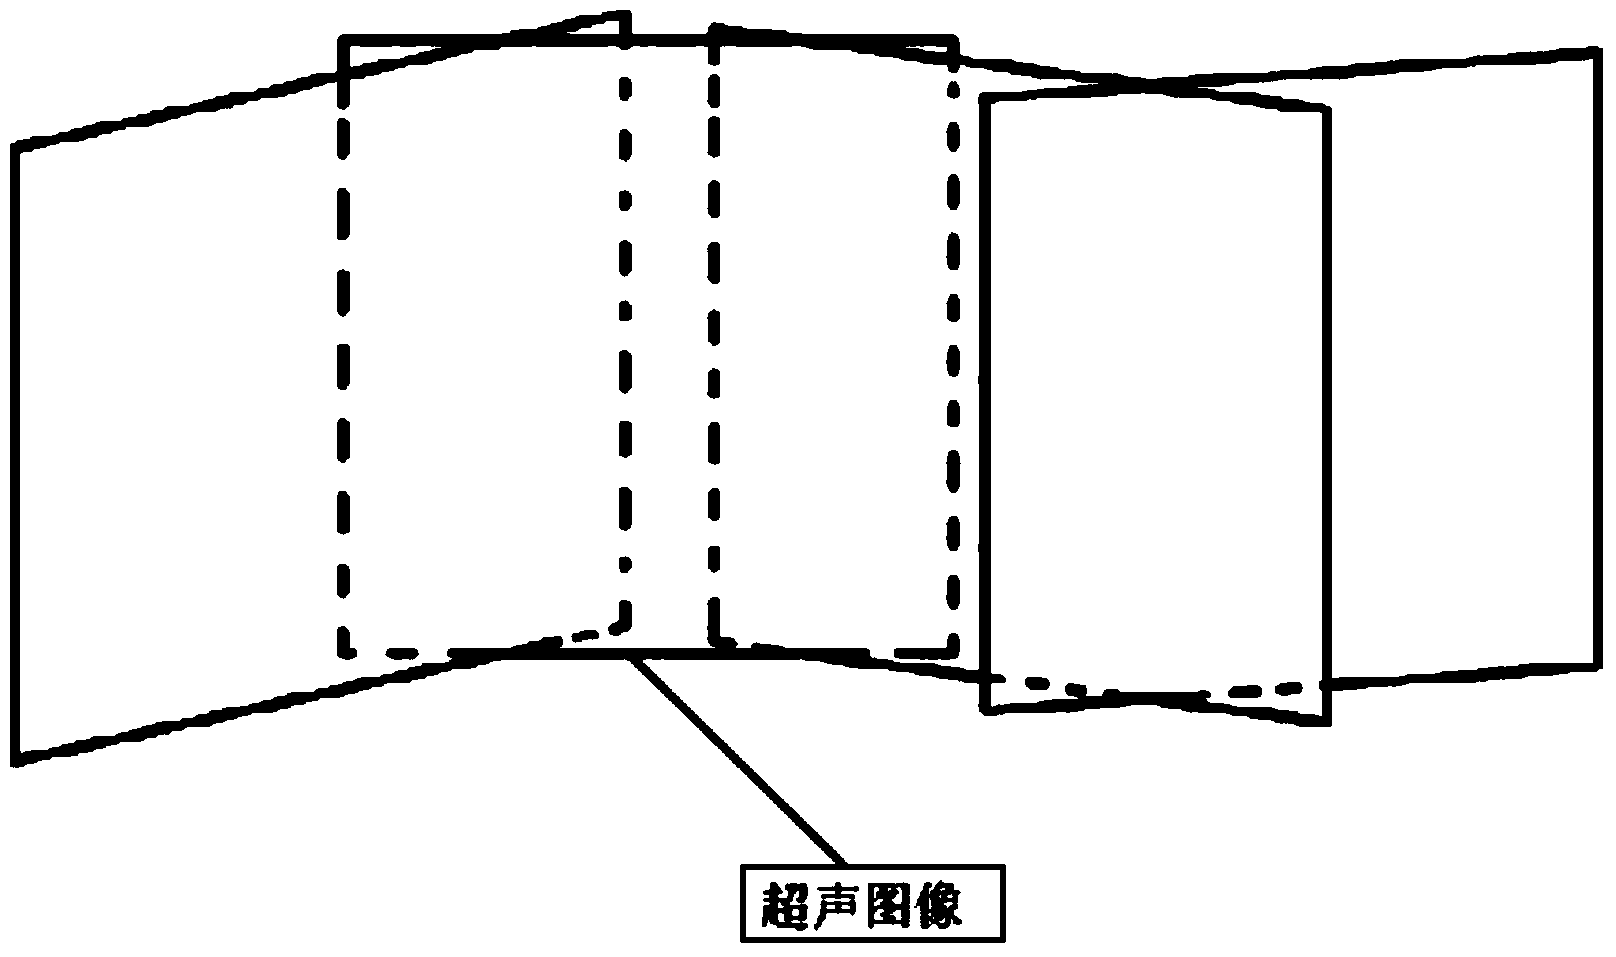 Position information based ultrasonic wide view imaging method